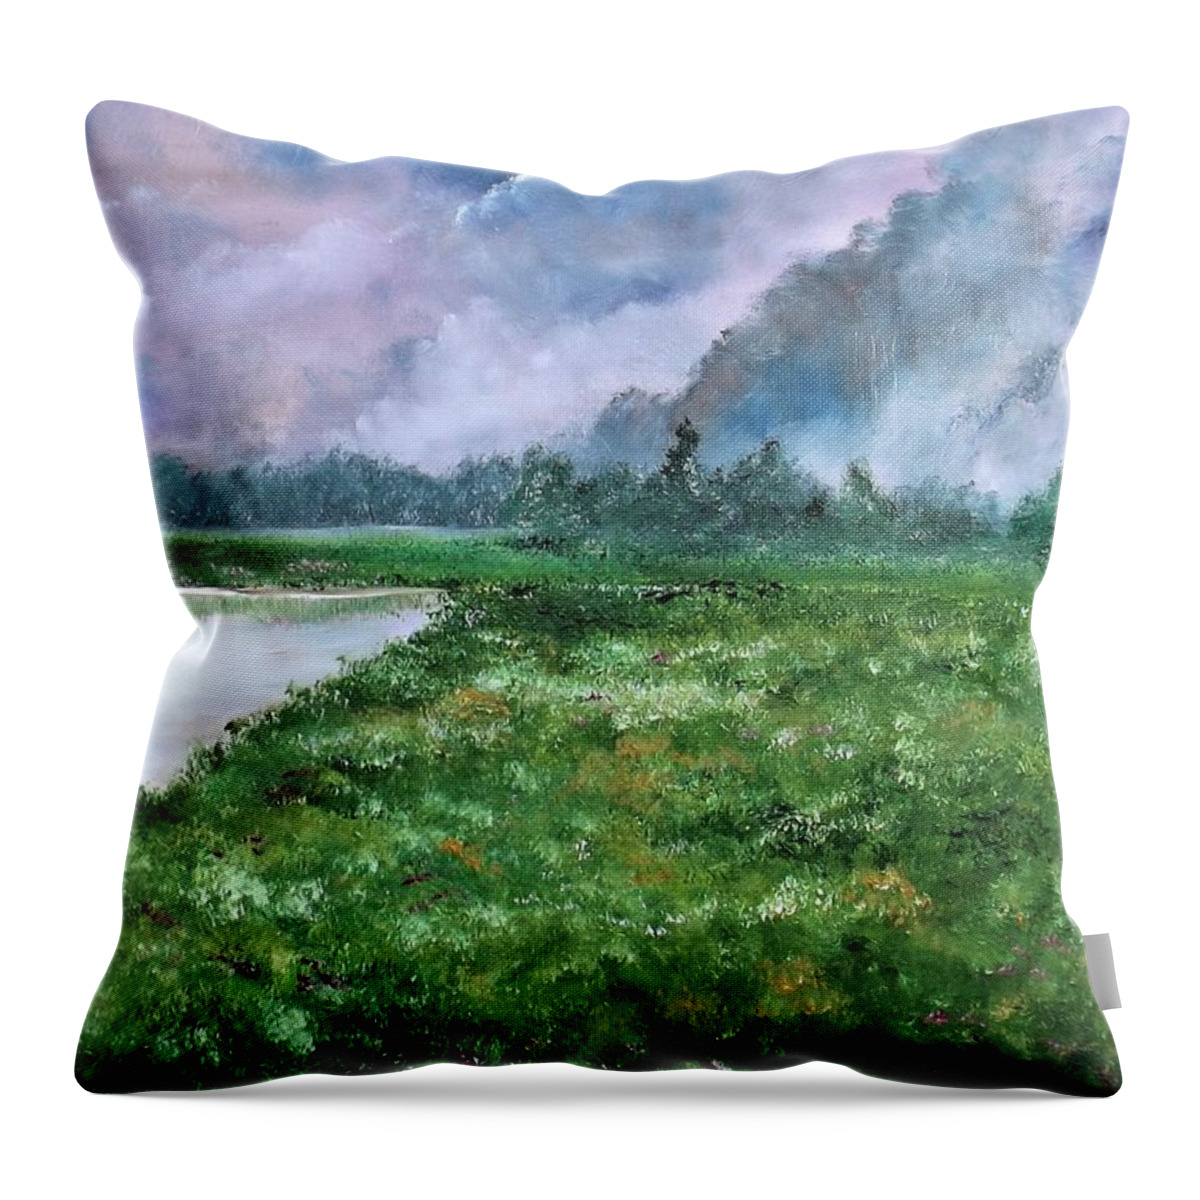 Landscape Throw Pillow featuring the painting Waiting For The Forecast by Lisa Aerts